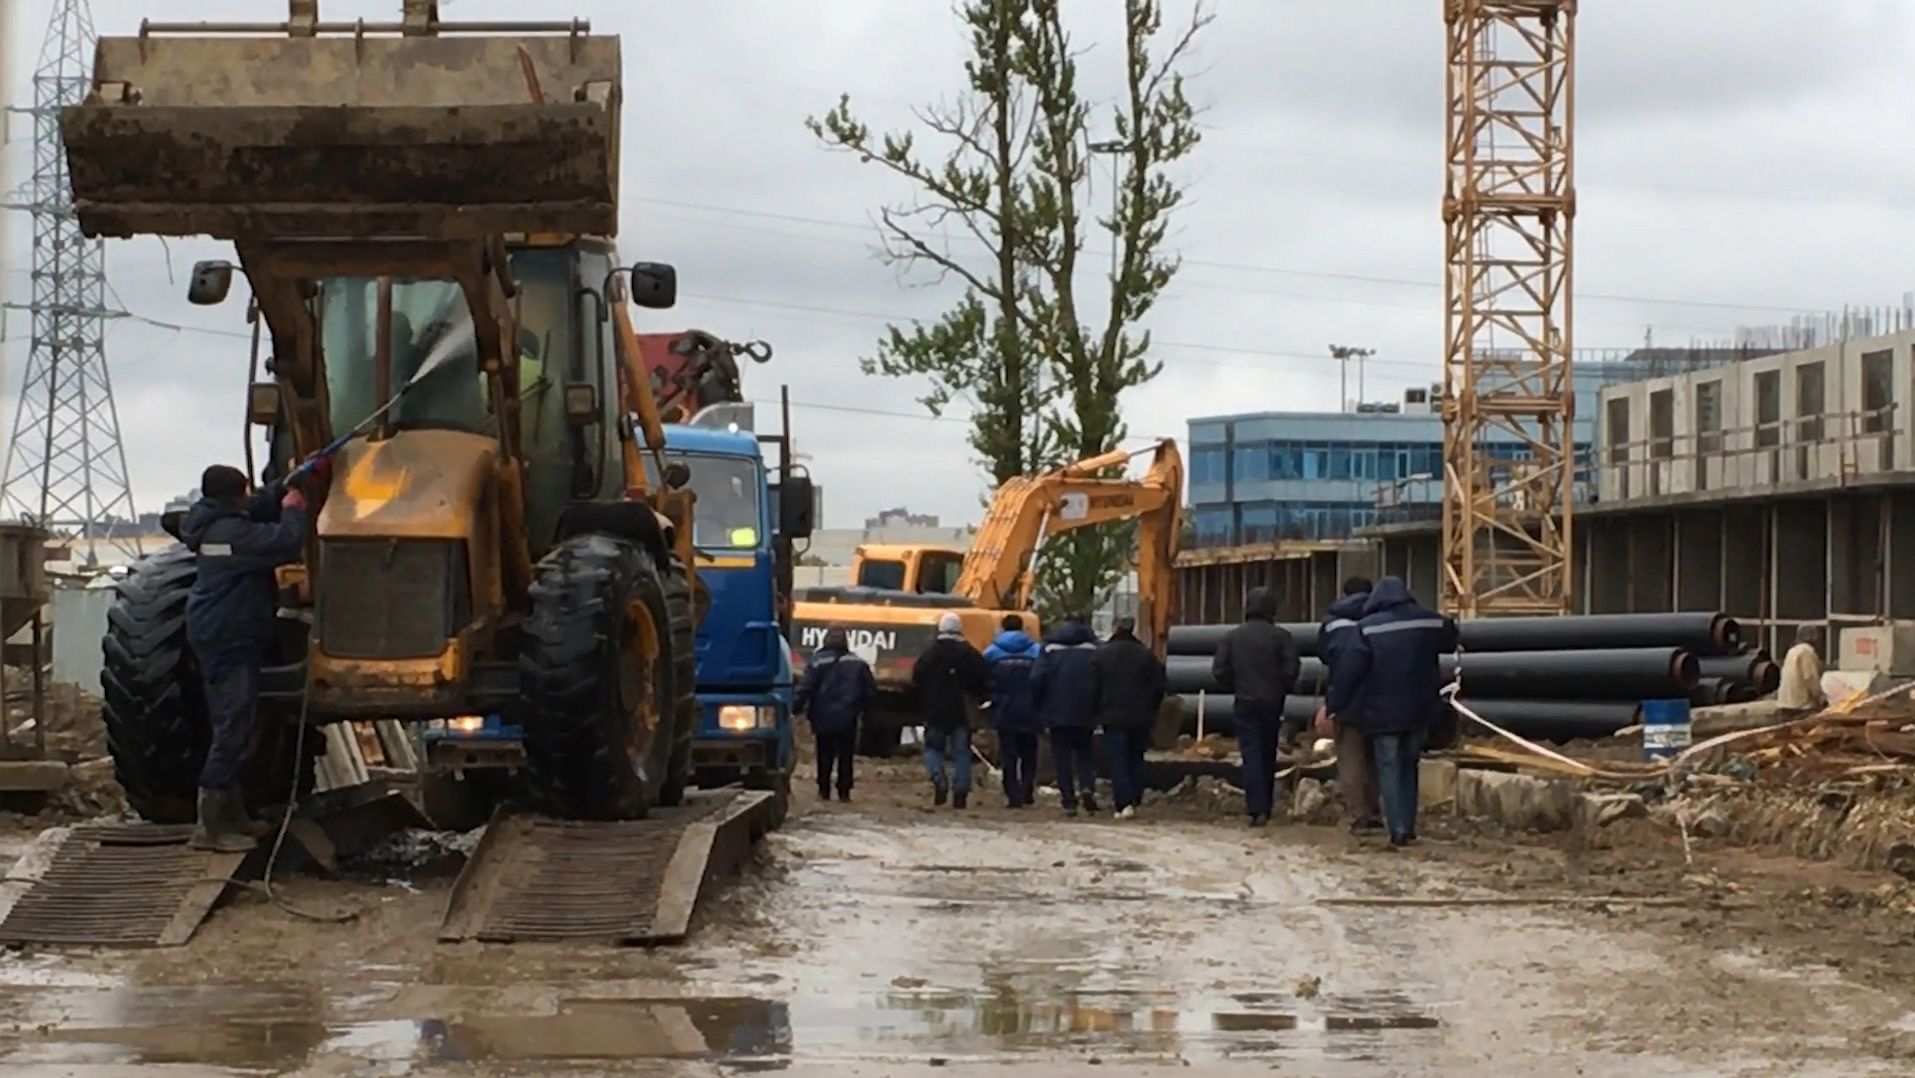 North Korean workers employed on this construction site are very likely to send funds back to their families.